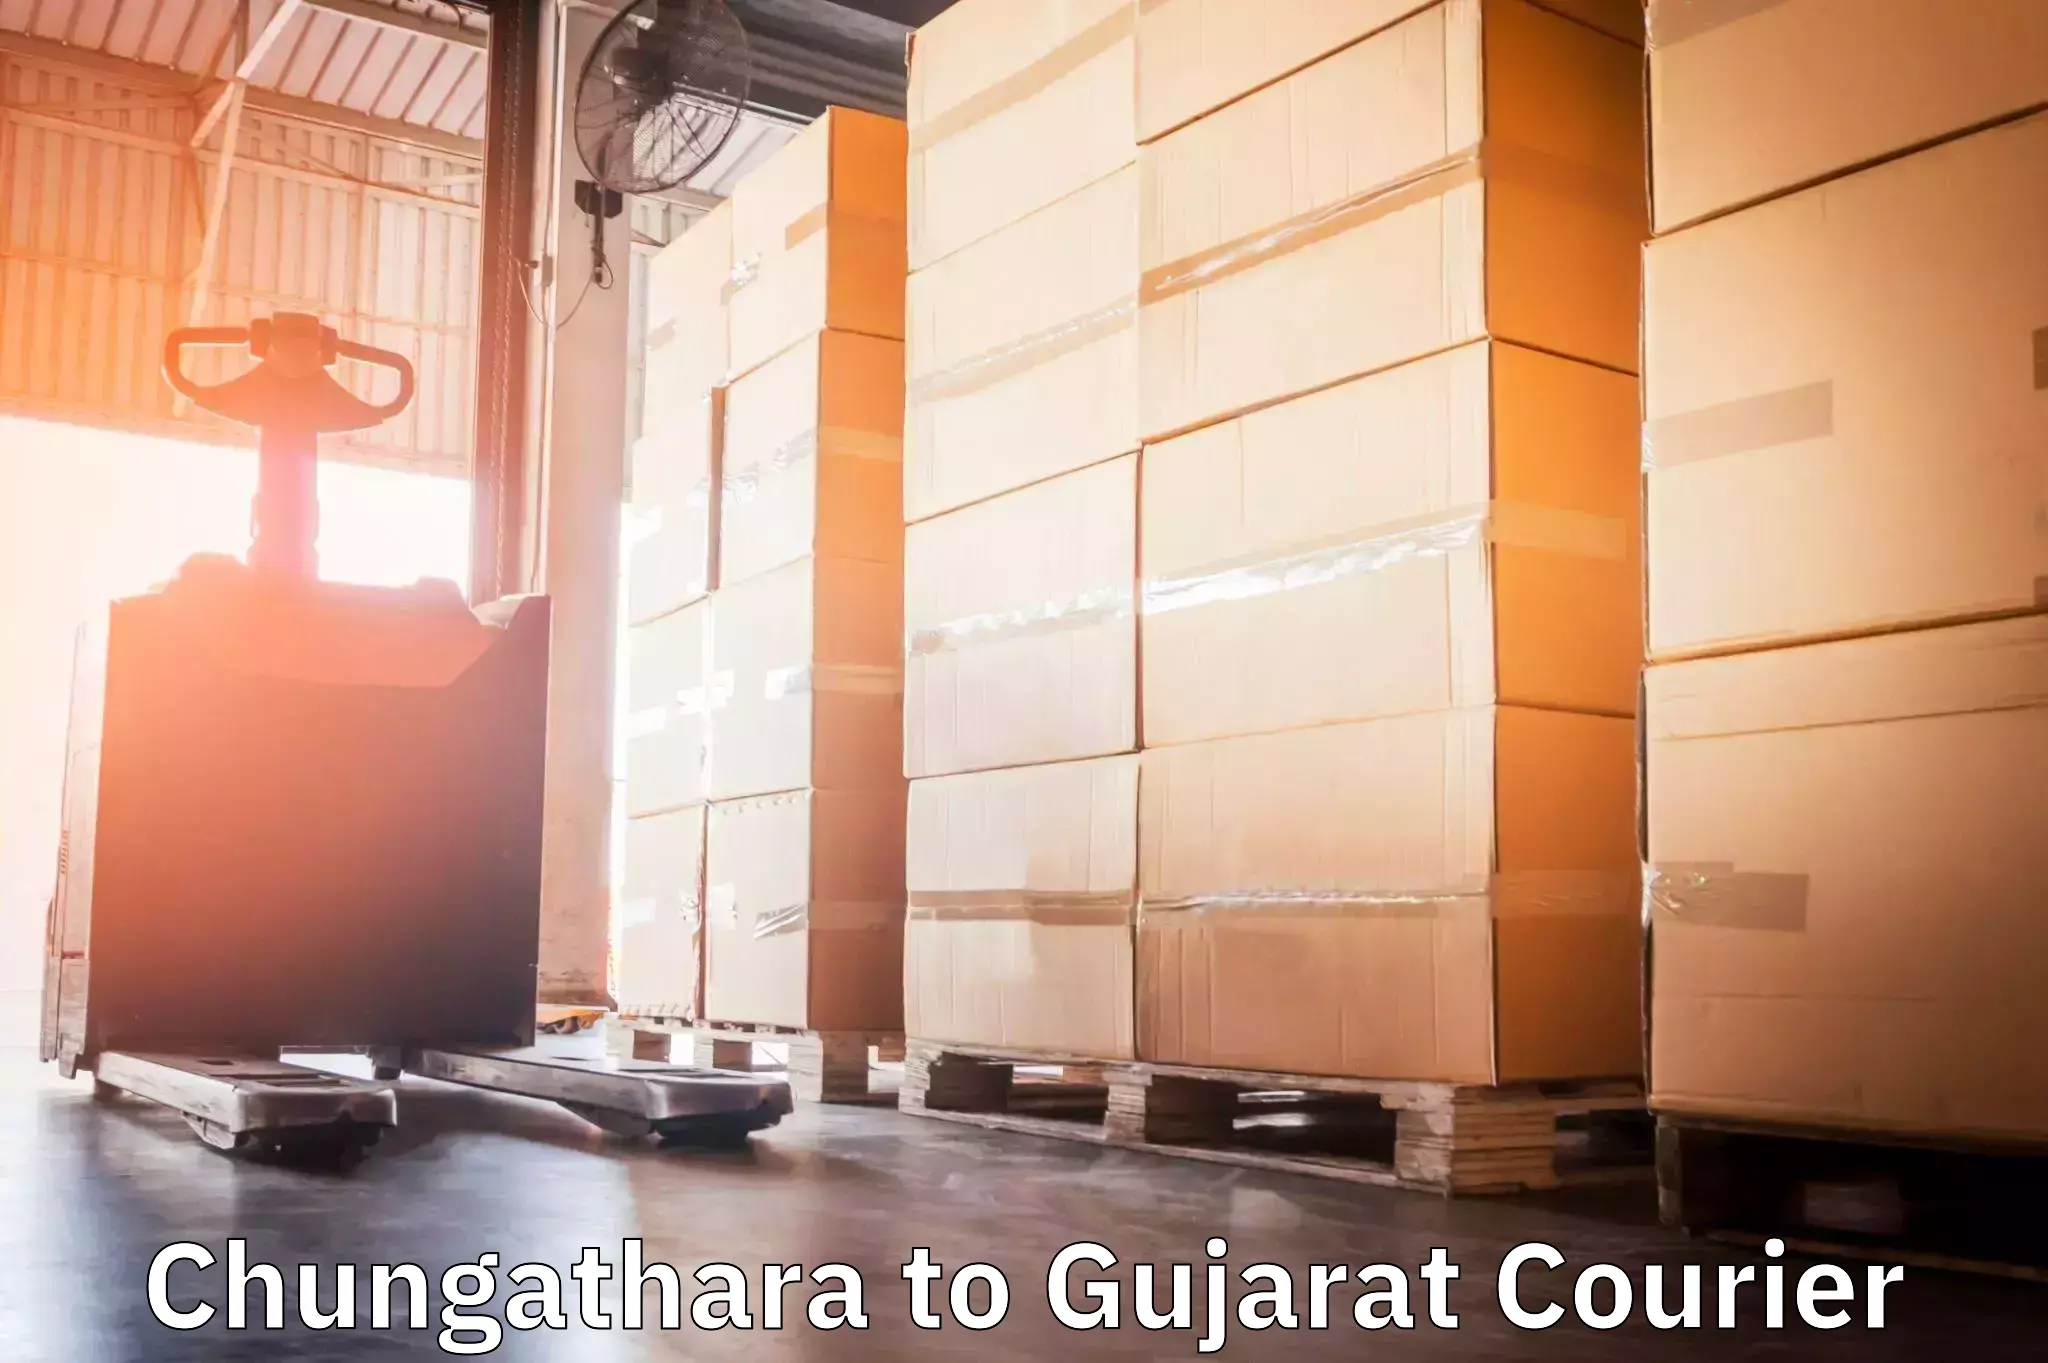 Courier rate comparison in Chungathara to Dharmasala